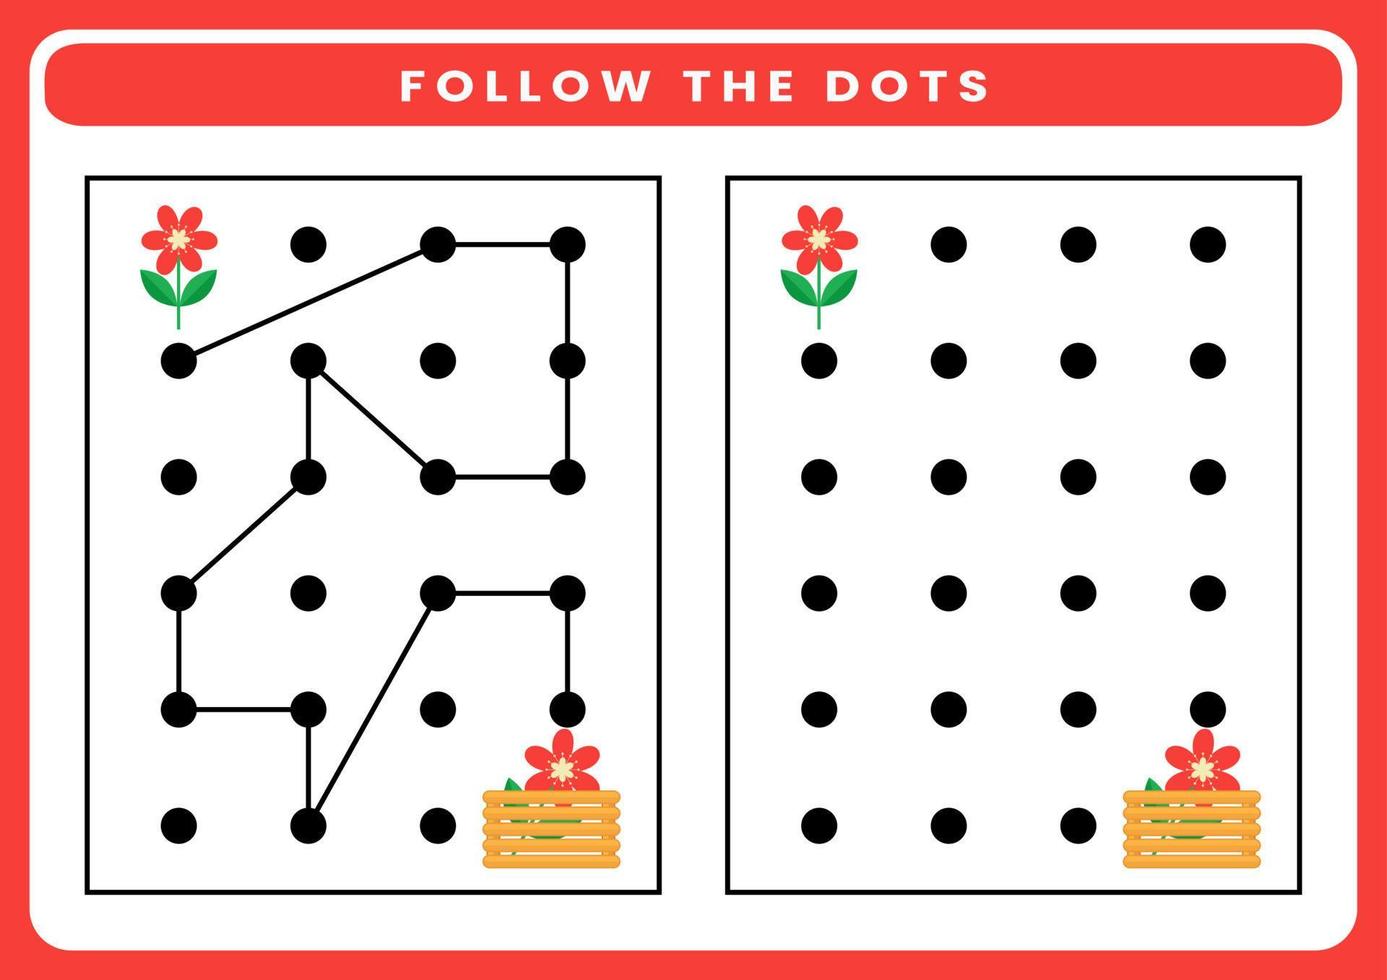 Follow the dots worksheet for kids vector